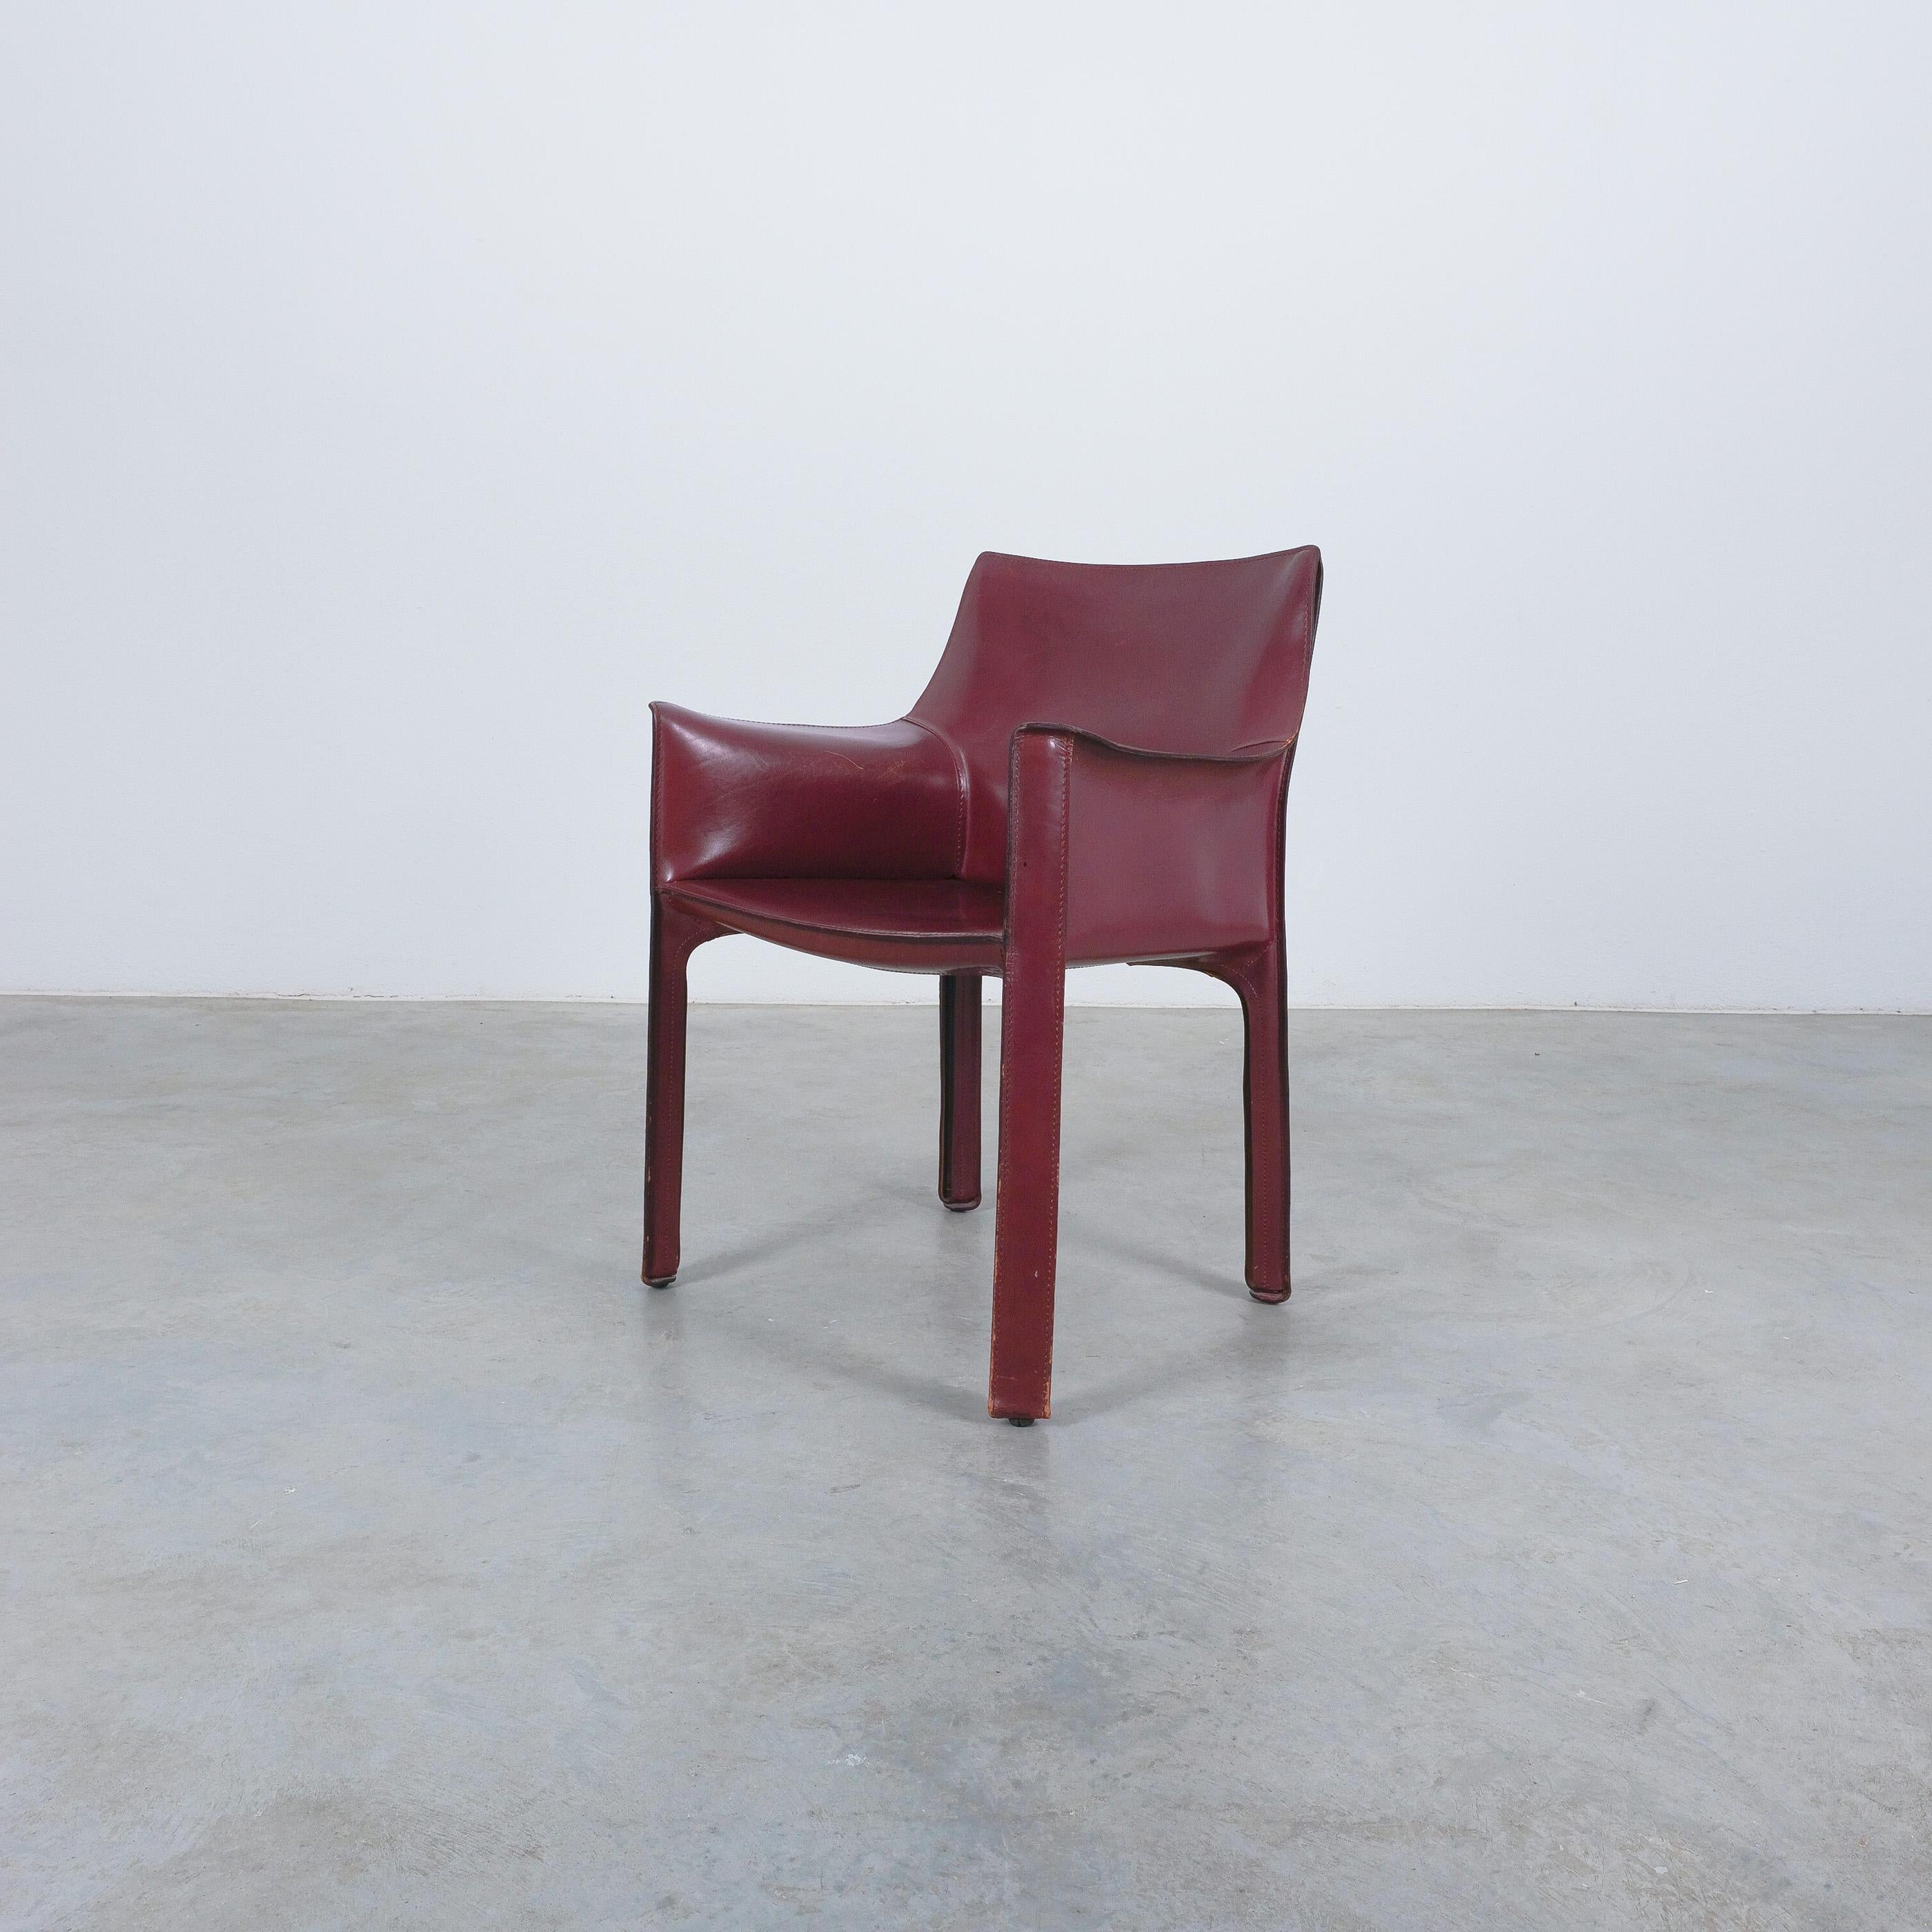 Post-Modern Mario Bellini Cassina Cab 413 Burgundy Red Leather Dining Chairs, 1980